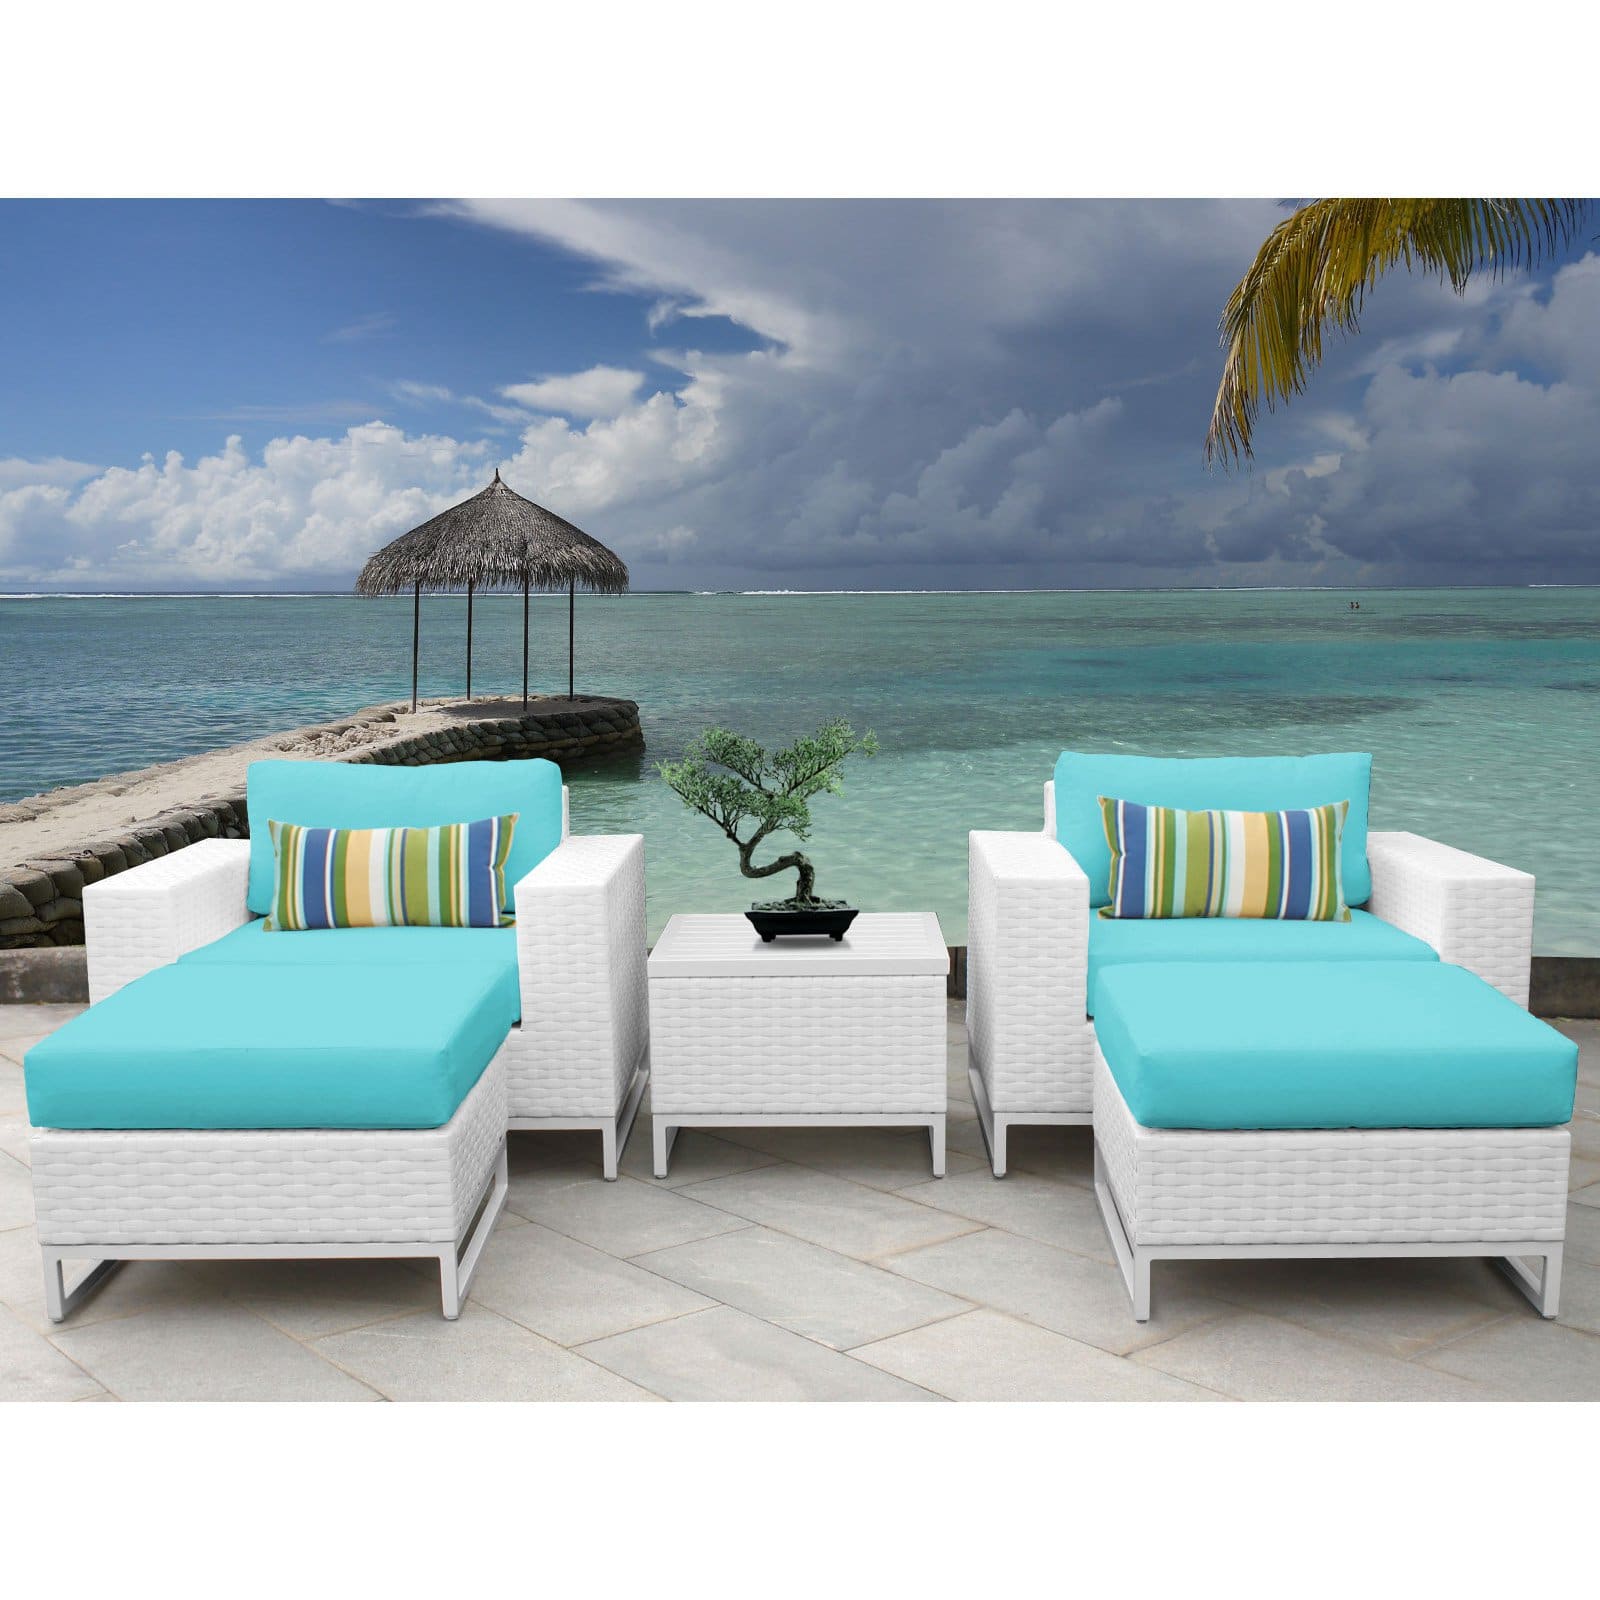 Florida 5-Piece Aluminum Framed Outdoor Conversation Set with Ottomans - image 2 of 3